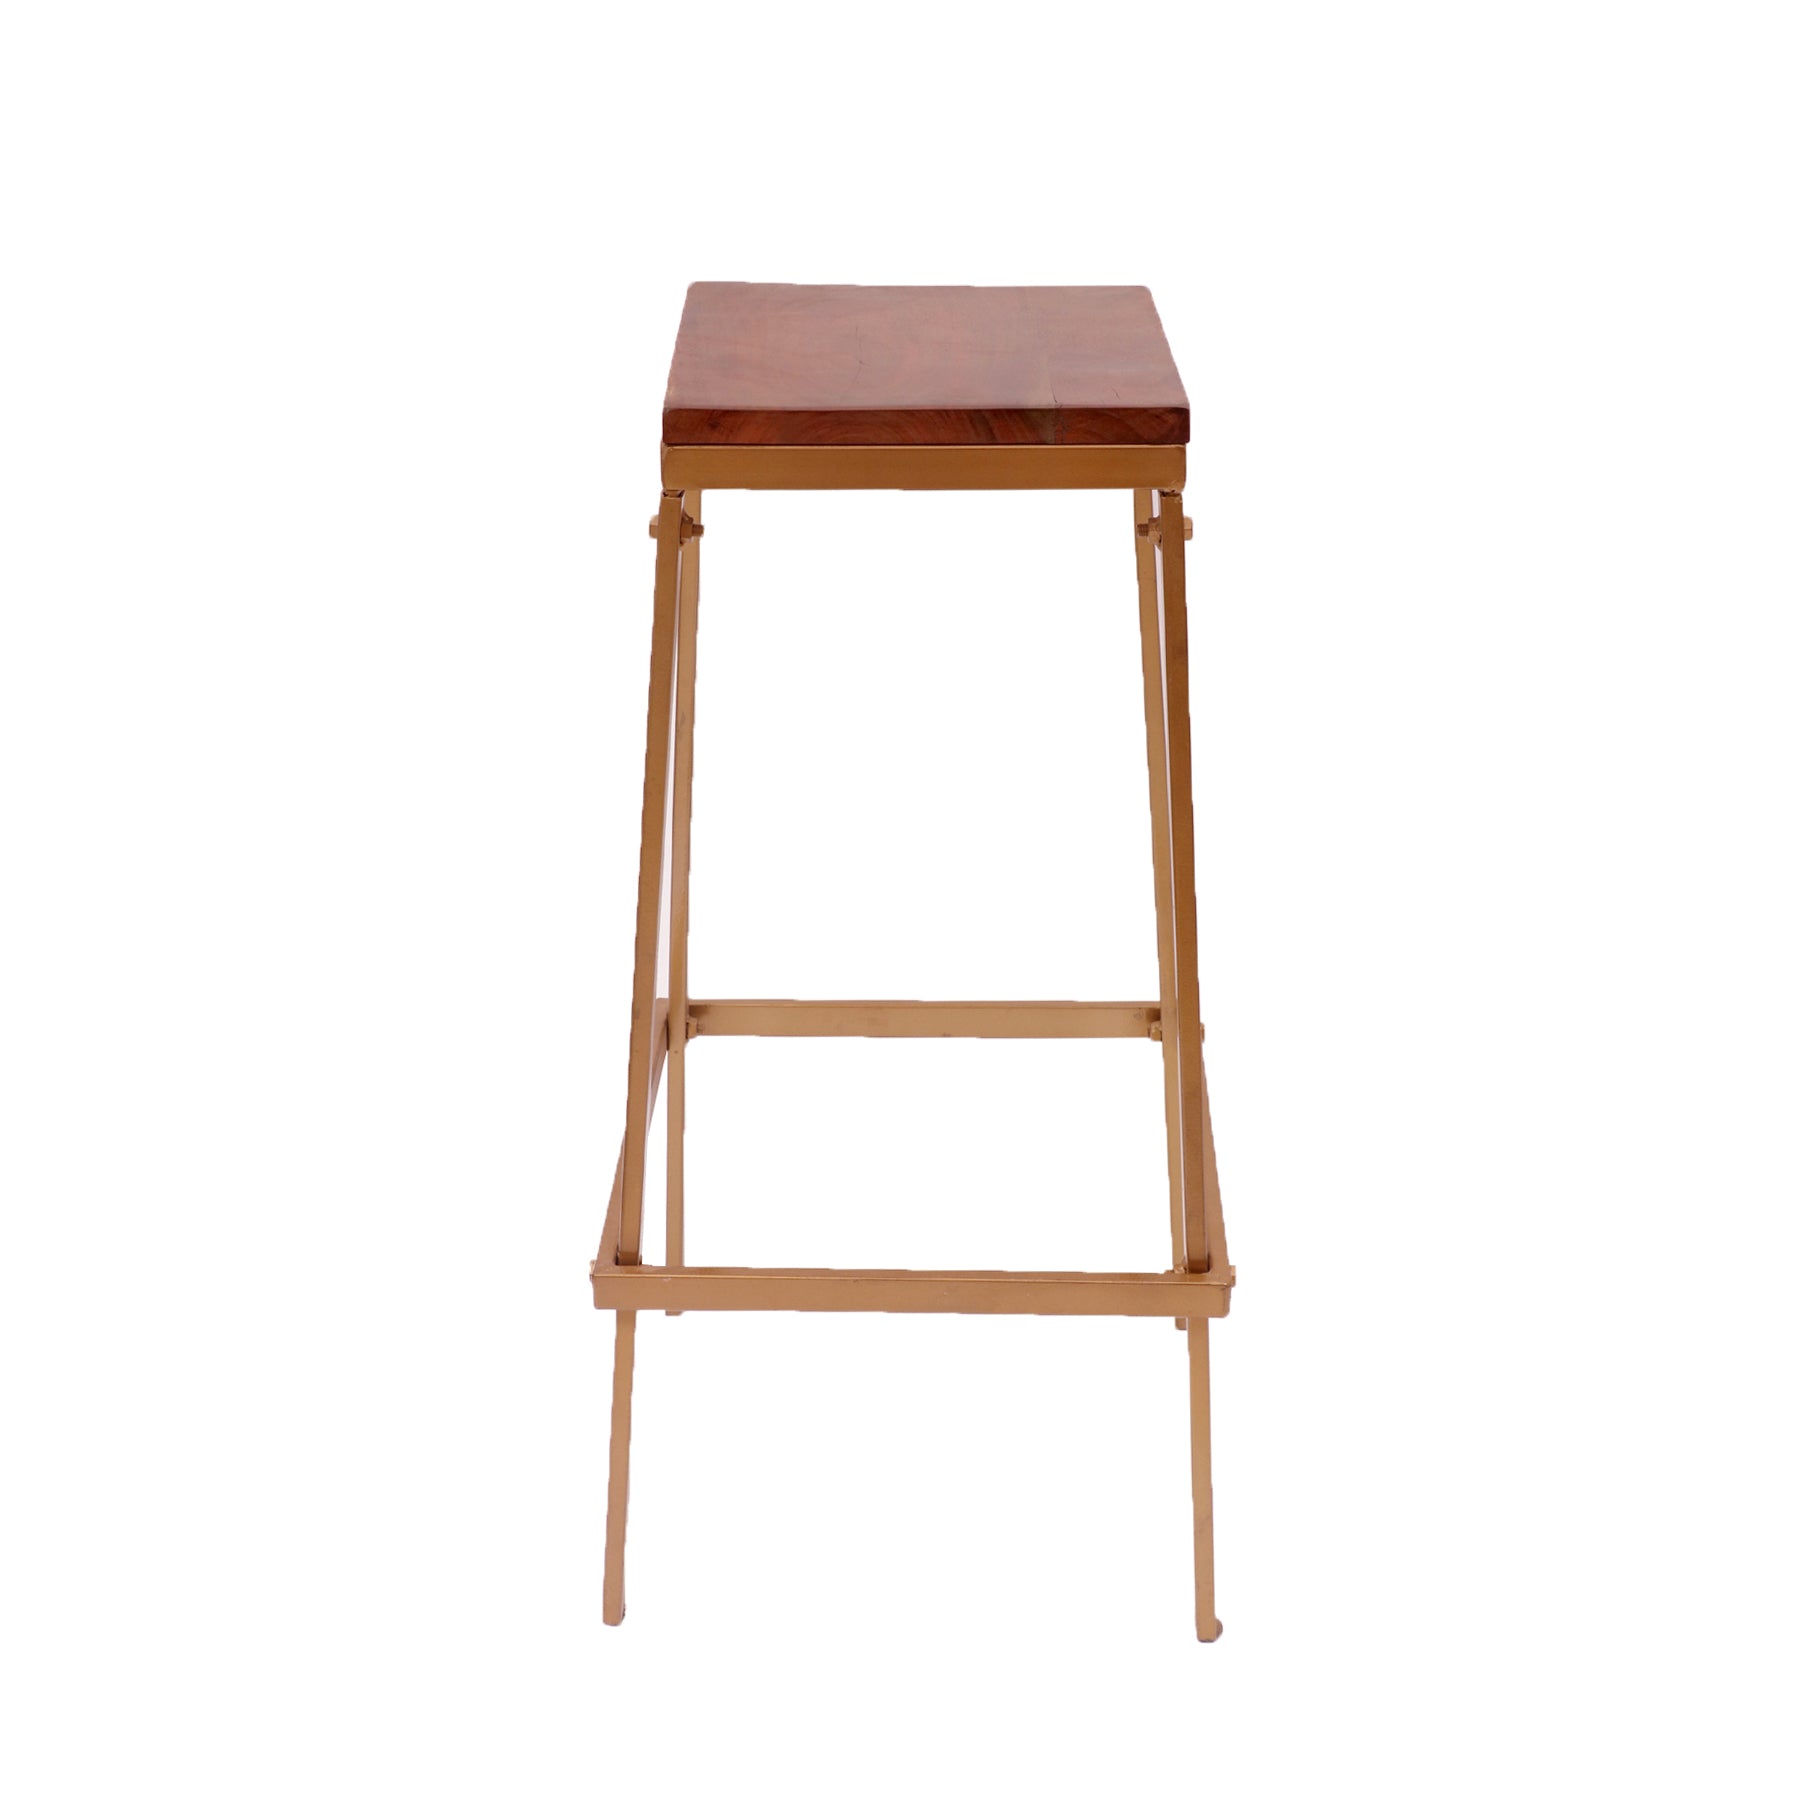 Dull Gold Solid Wood Stool Stool